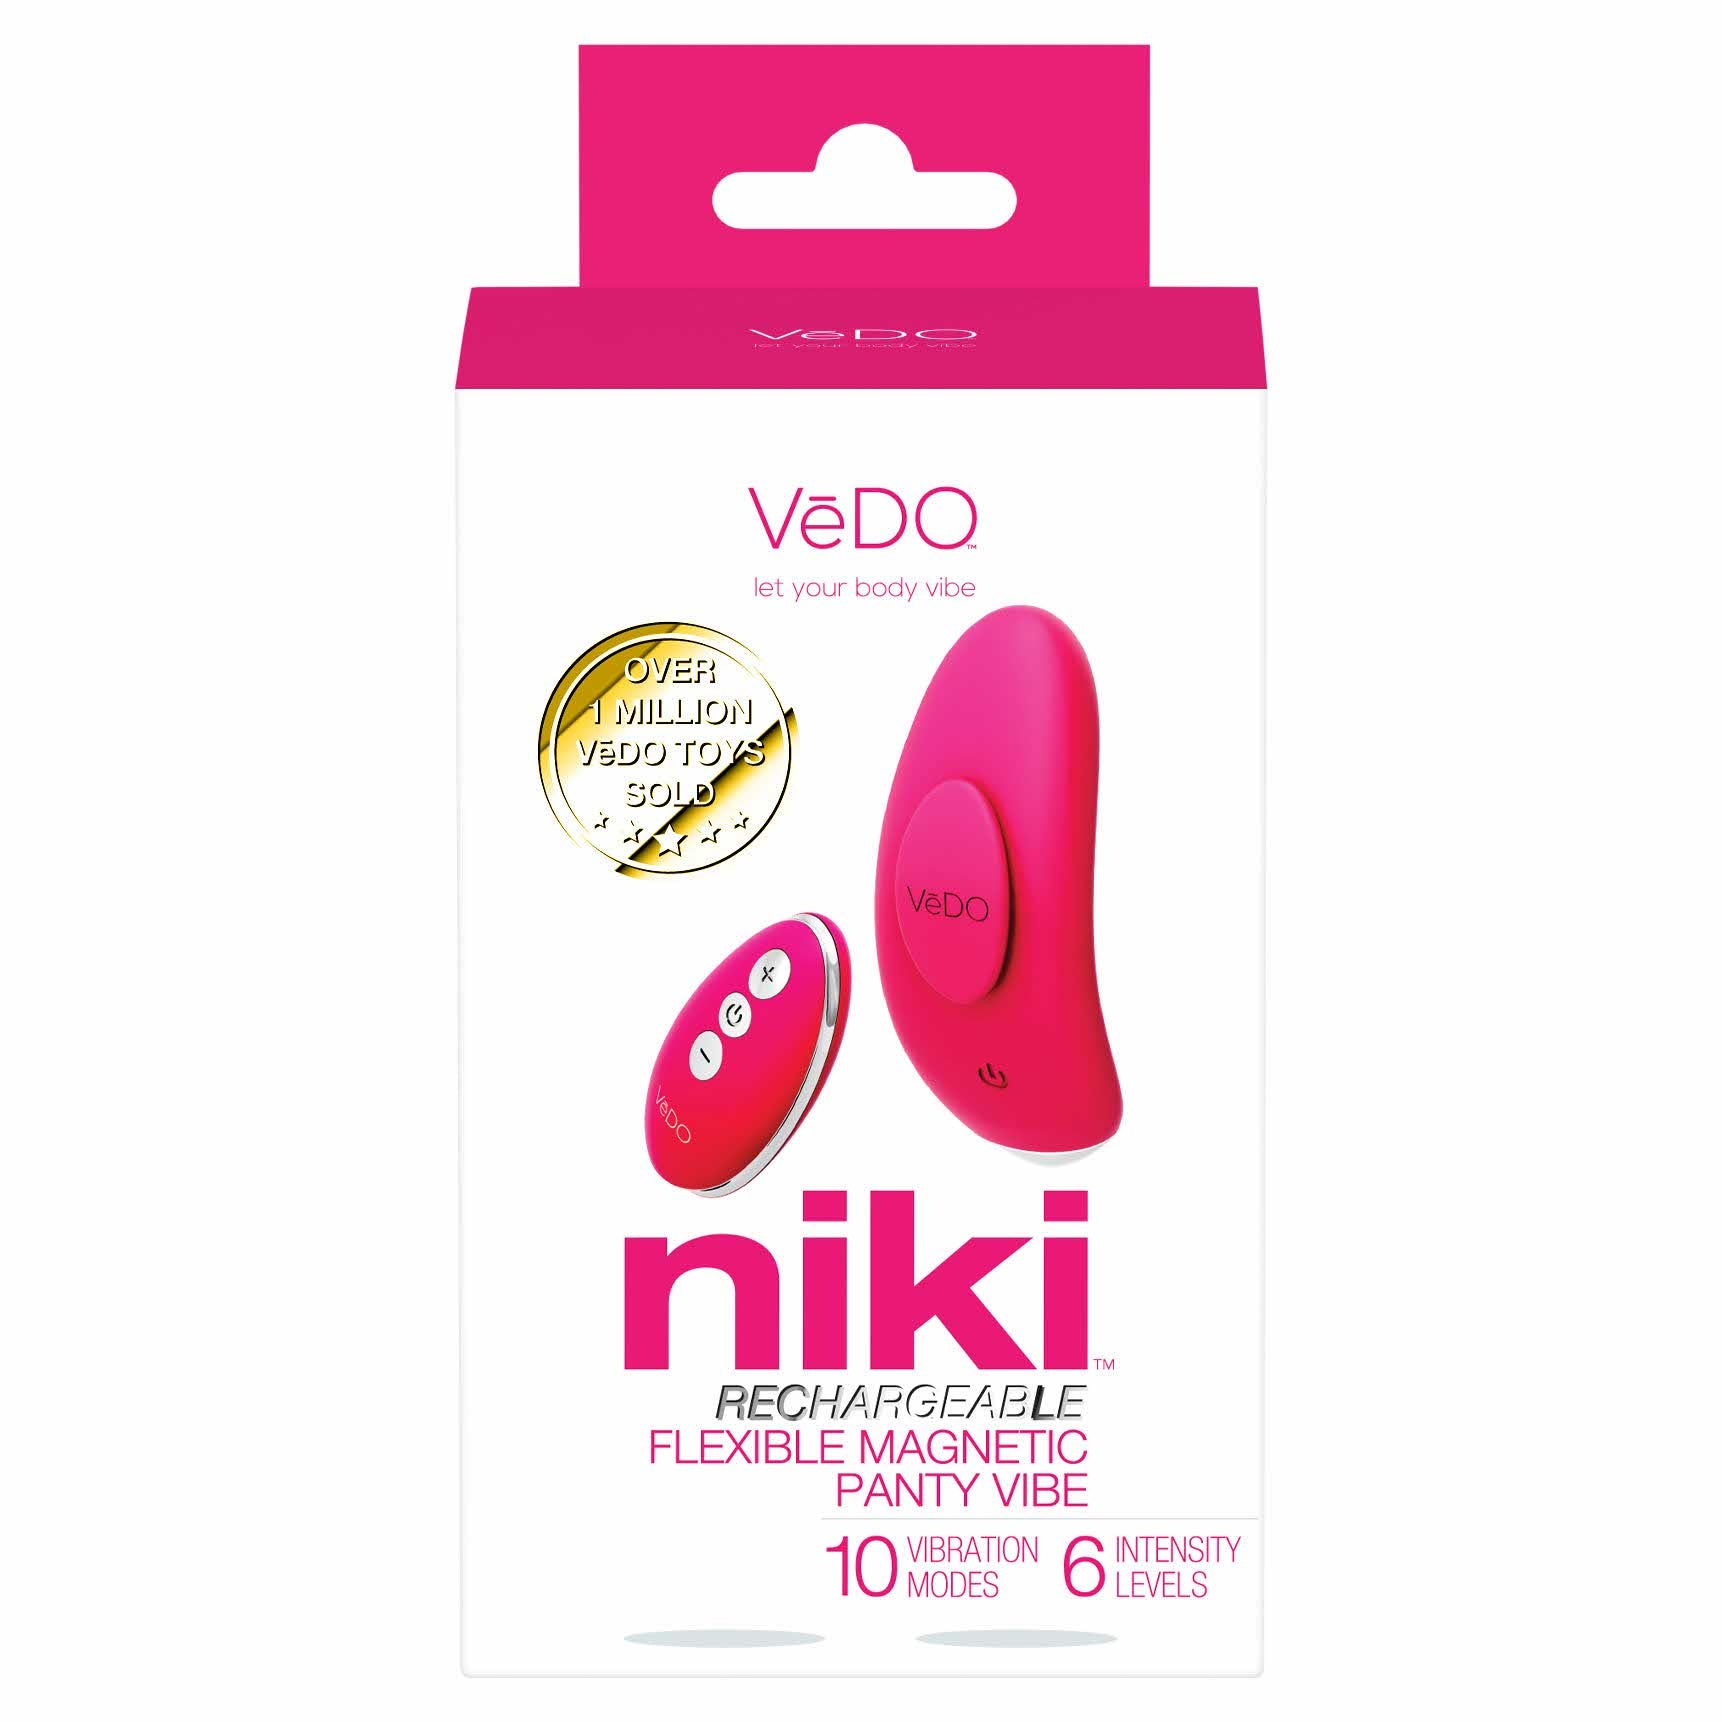 packaging of the vedo niki rechargeable panty vibrator vibe savvi-p1609 pink